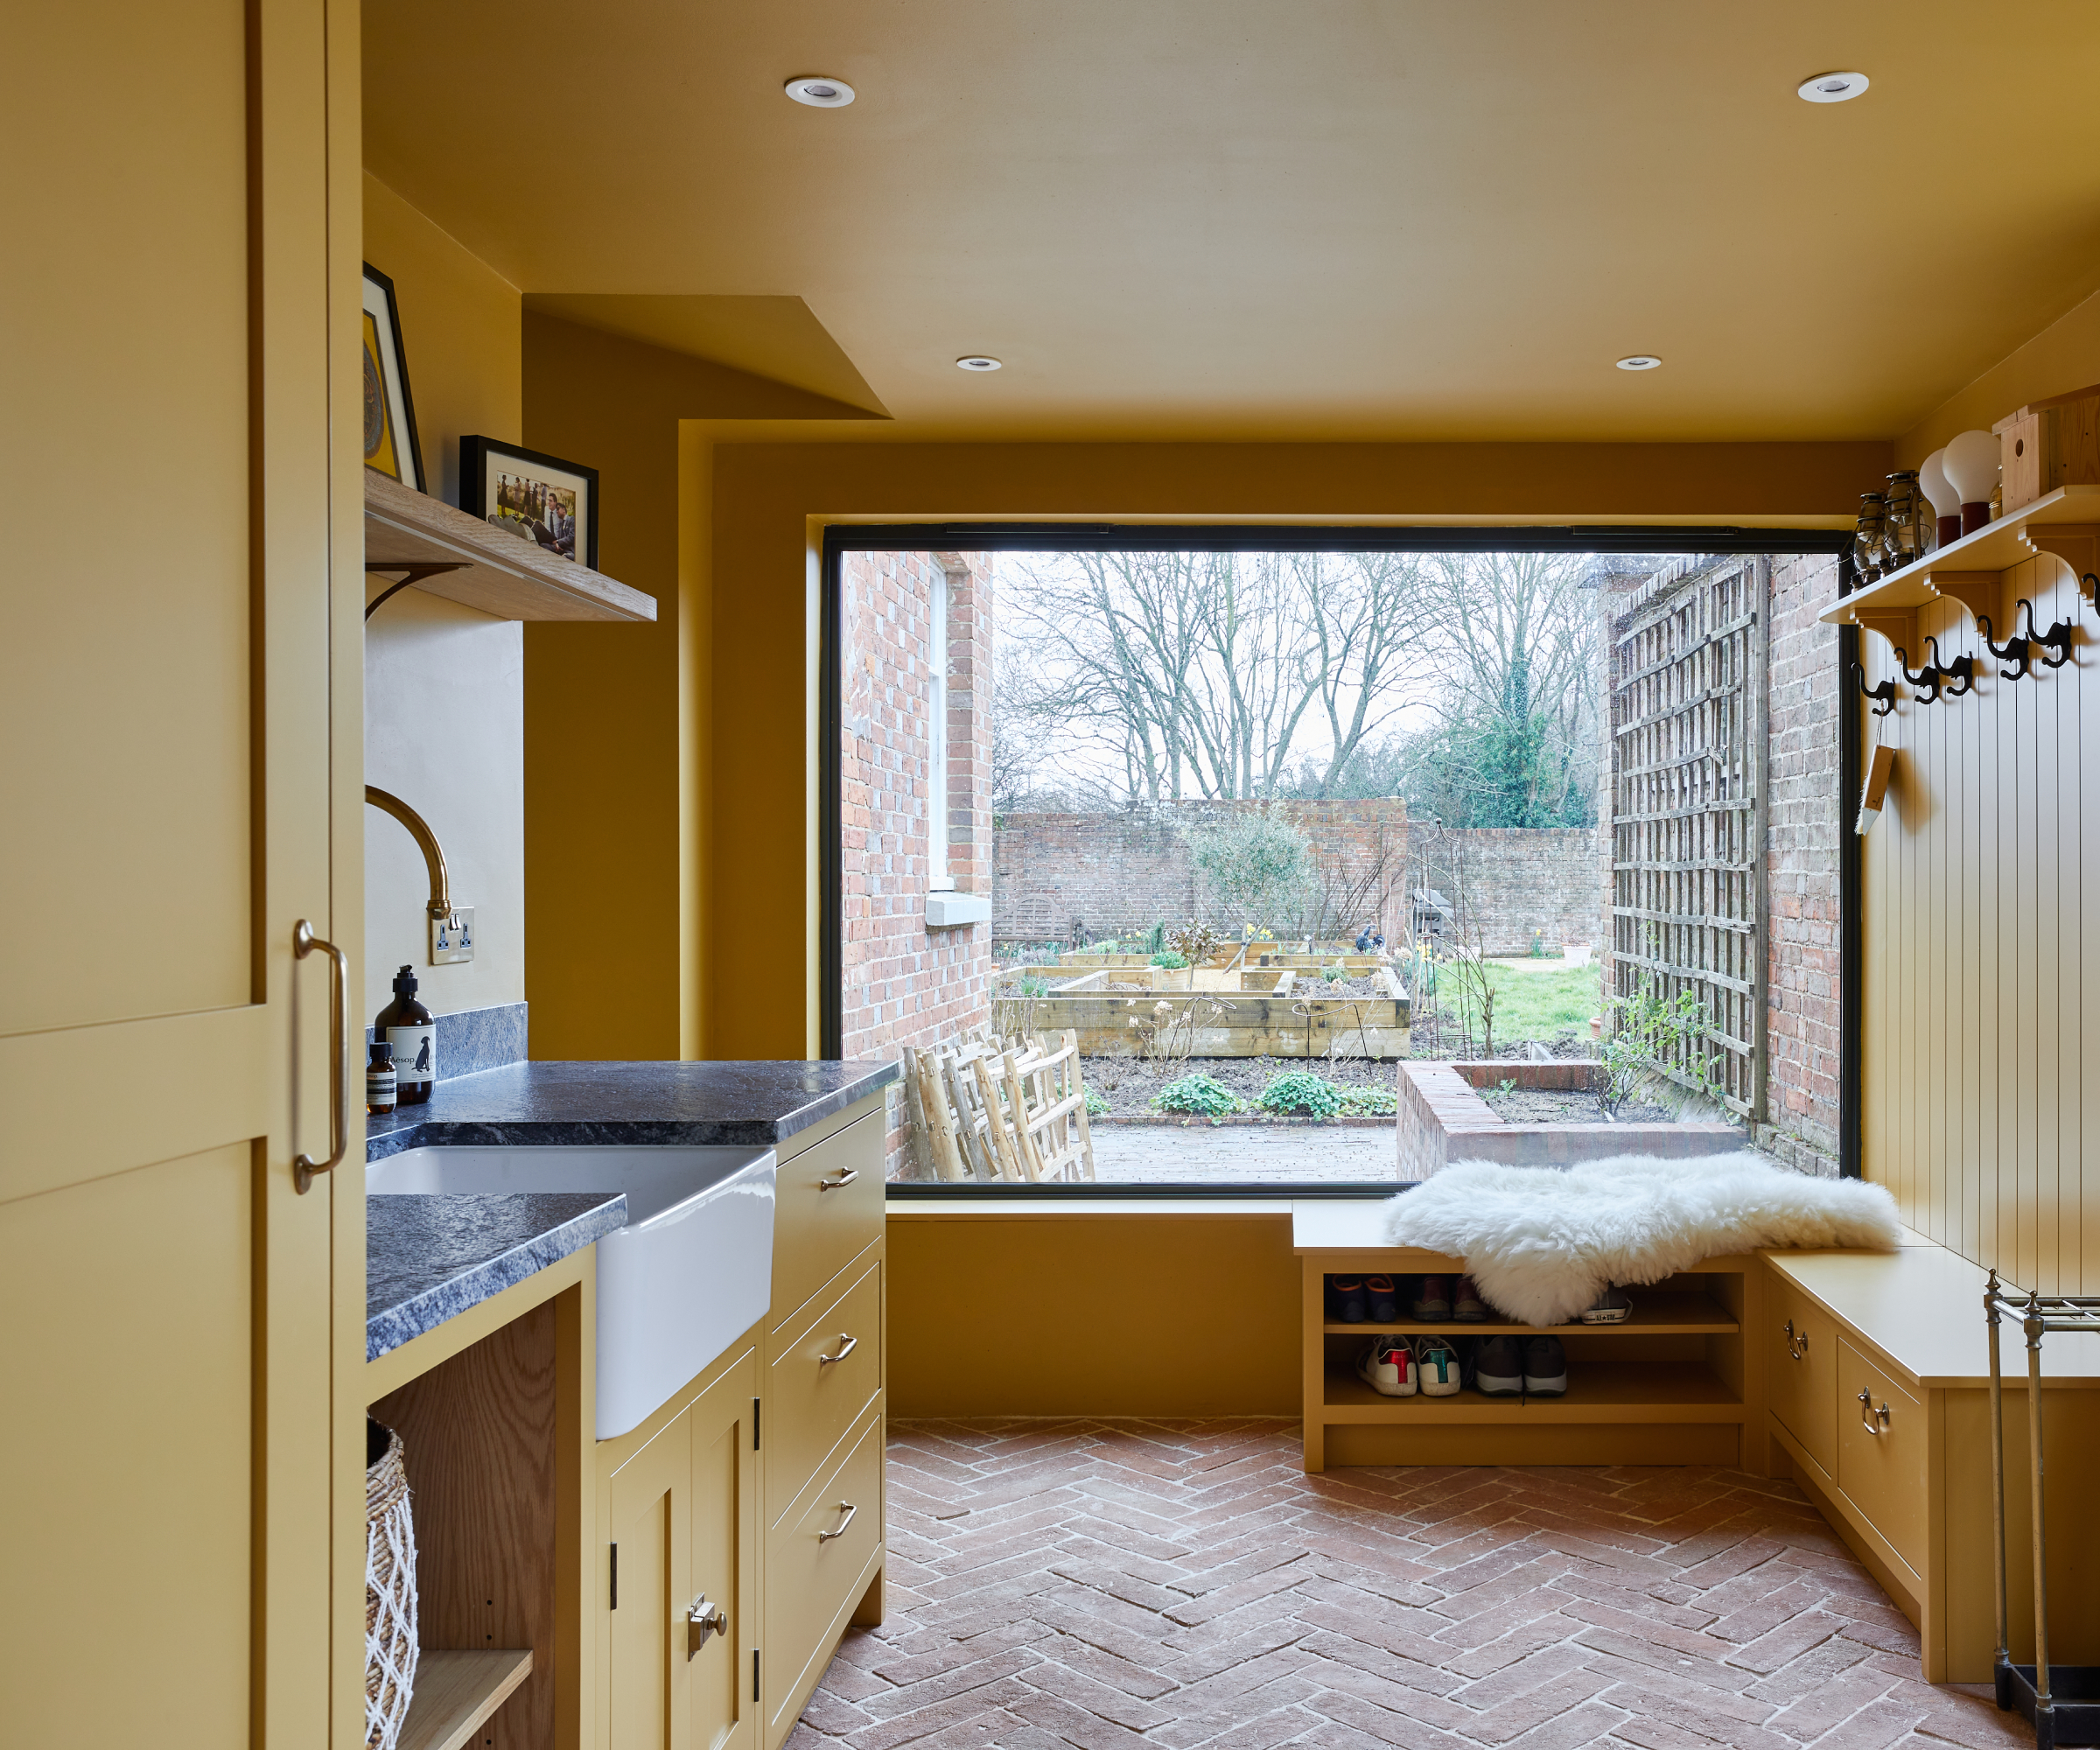 yellow utility room with large picture window at end